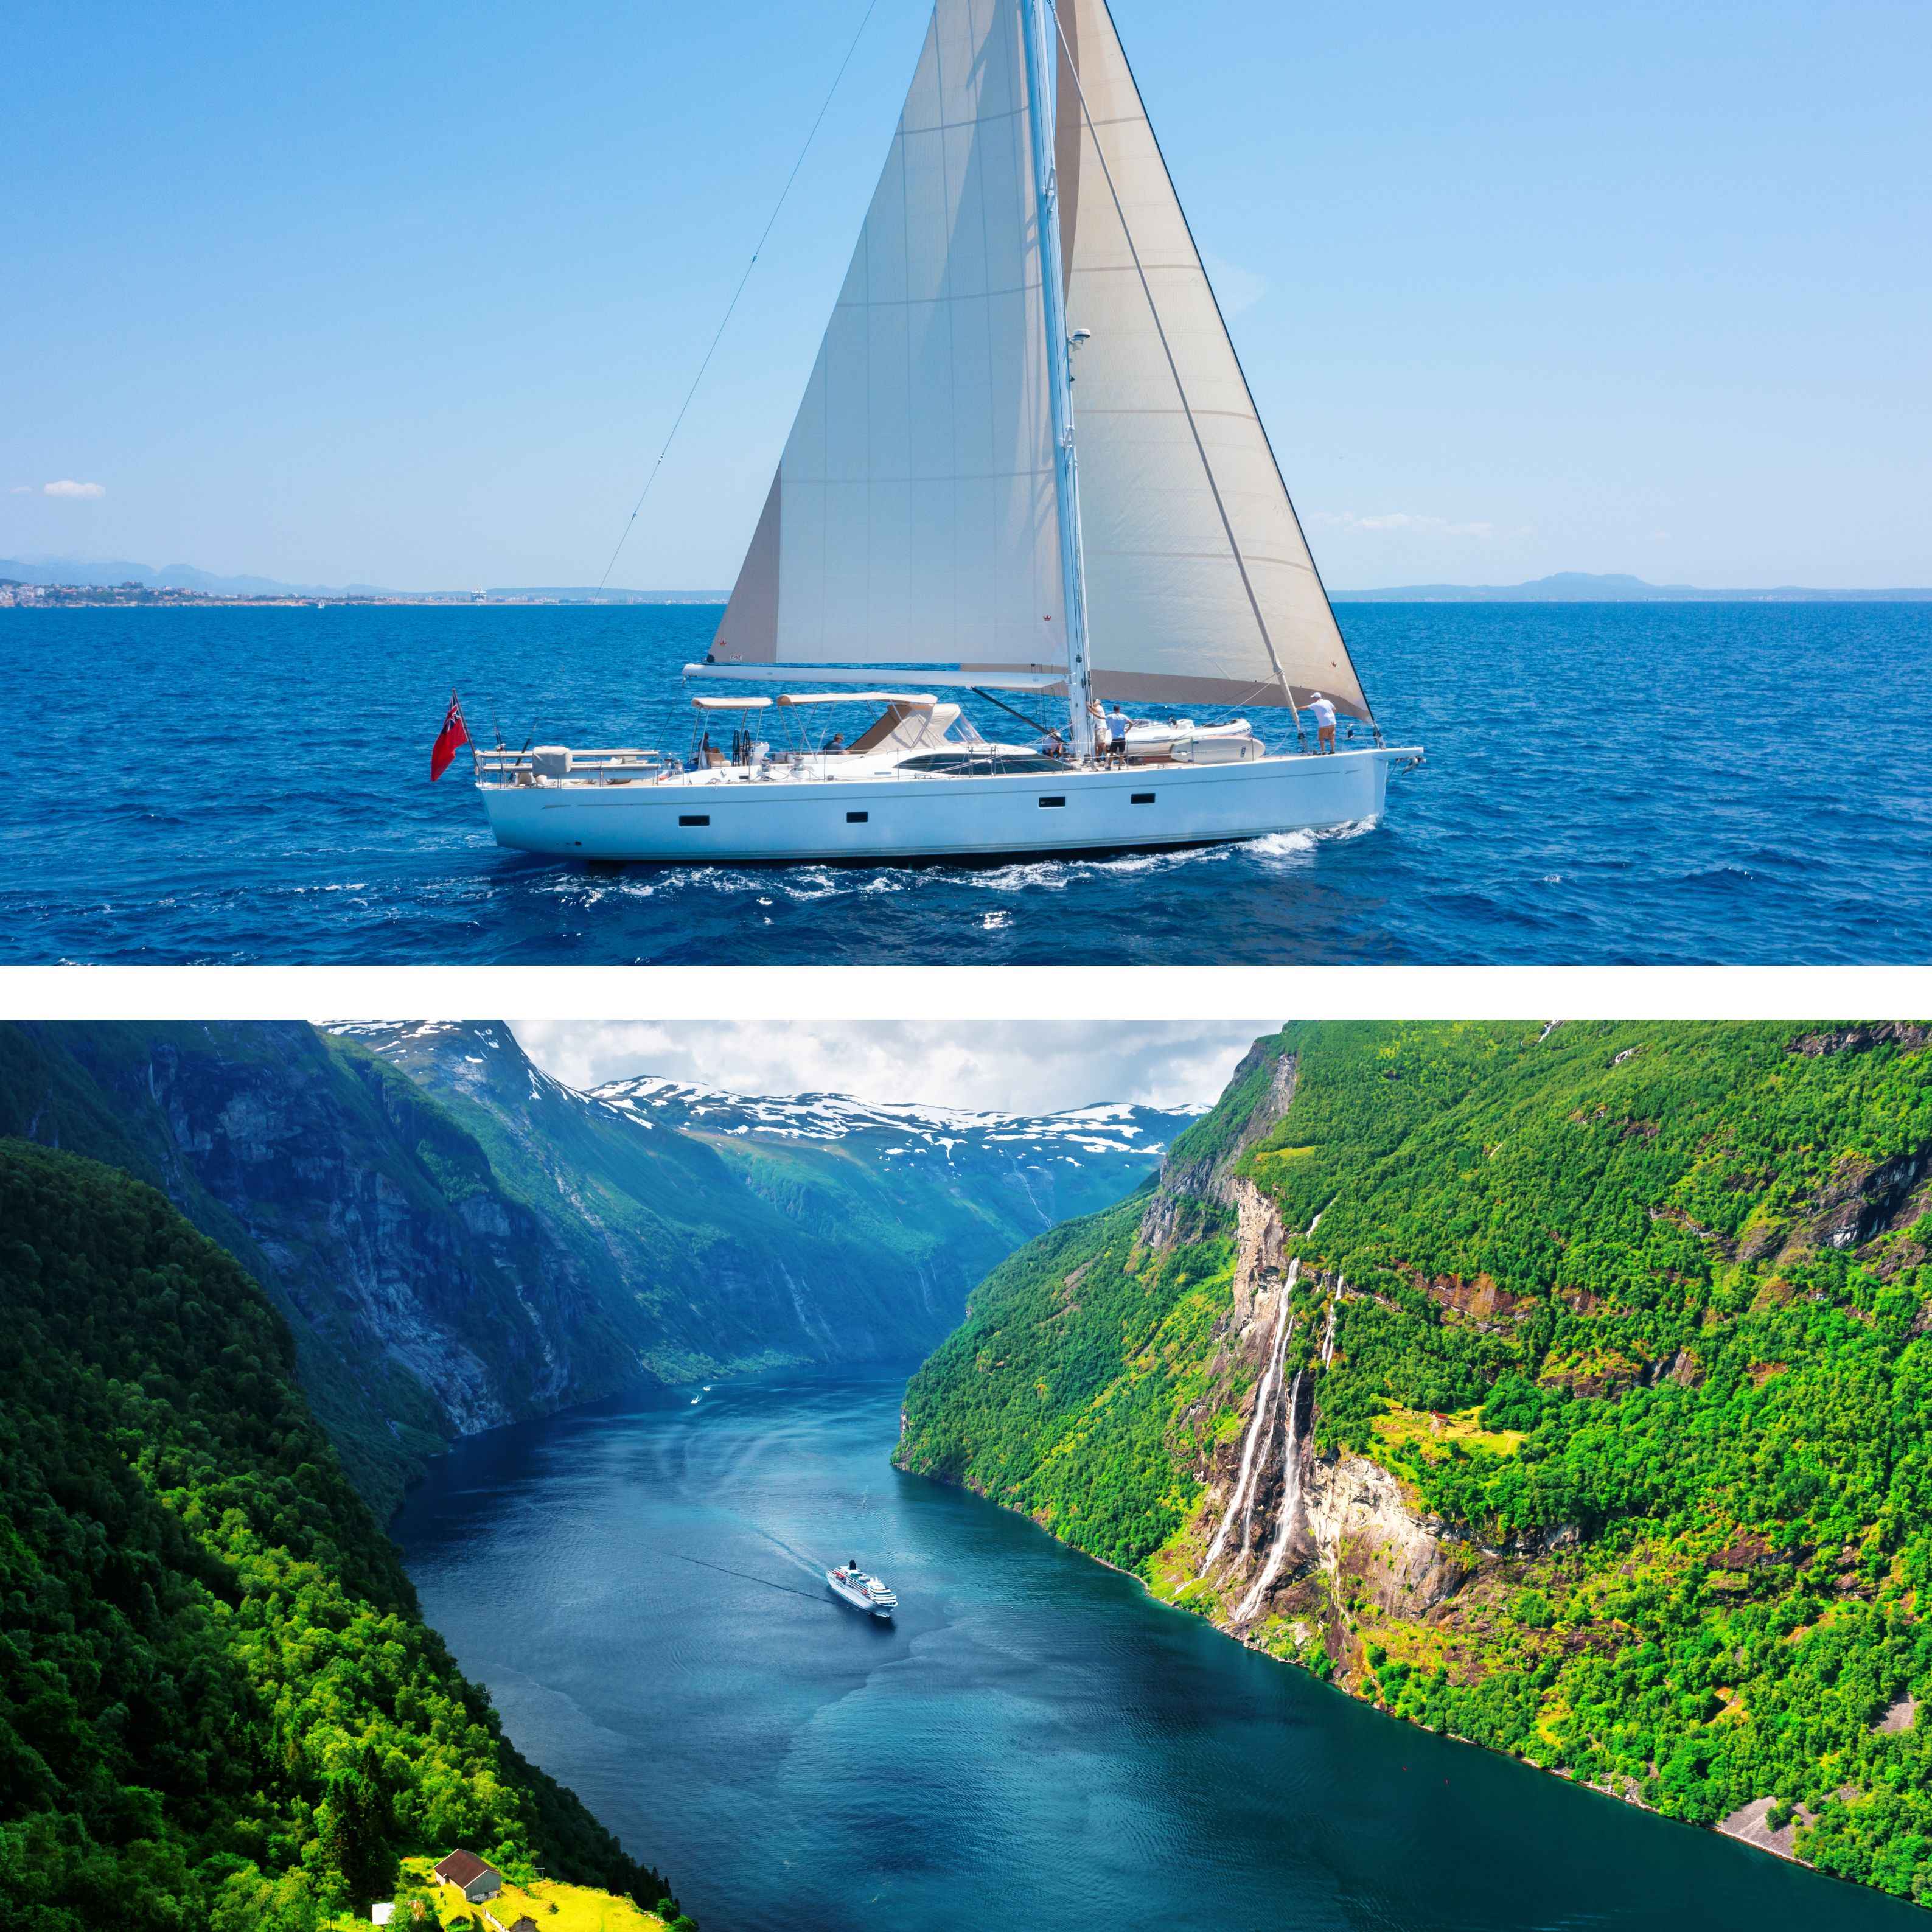 Charter CHAMPAGNE HIPPY in Norway this summer!